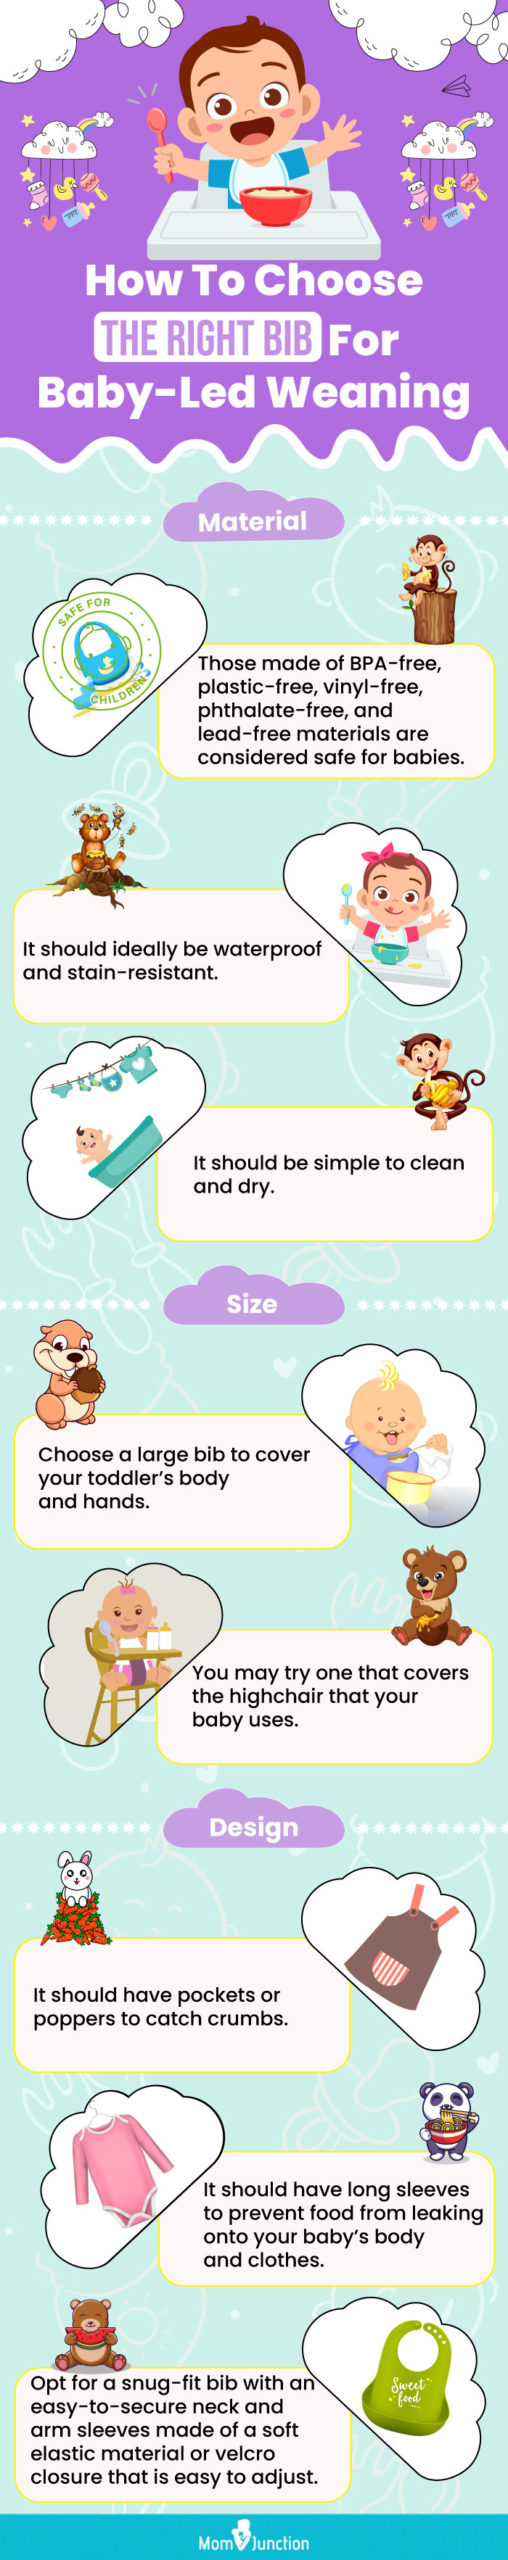 How To Choose The Right Bib For Baby Led Weaning (infographic)